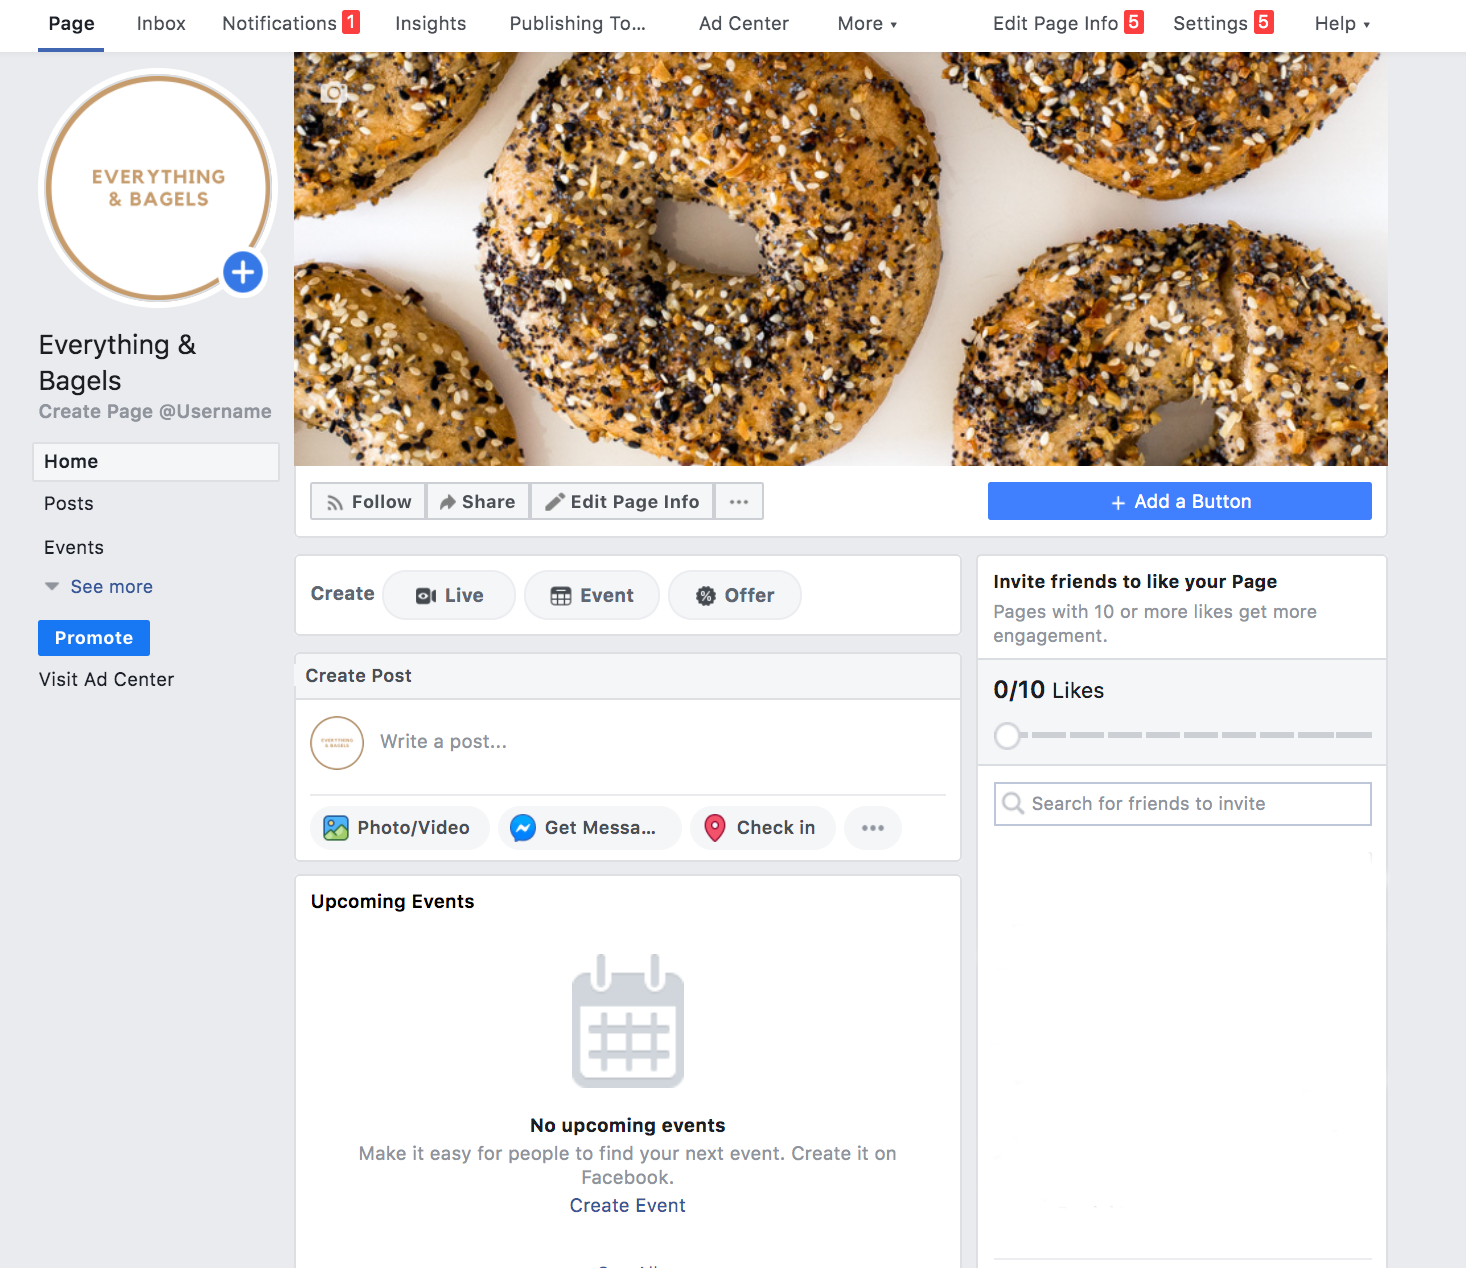 How to Create a Facebook Business Page From Your Profile